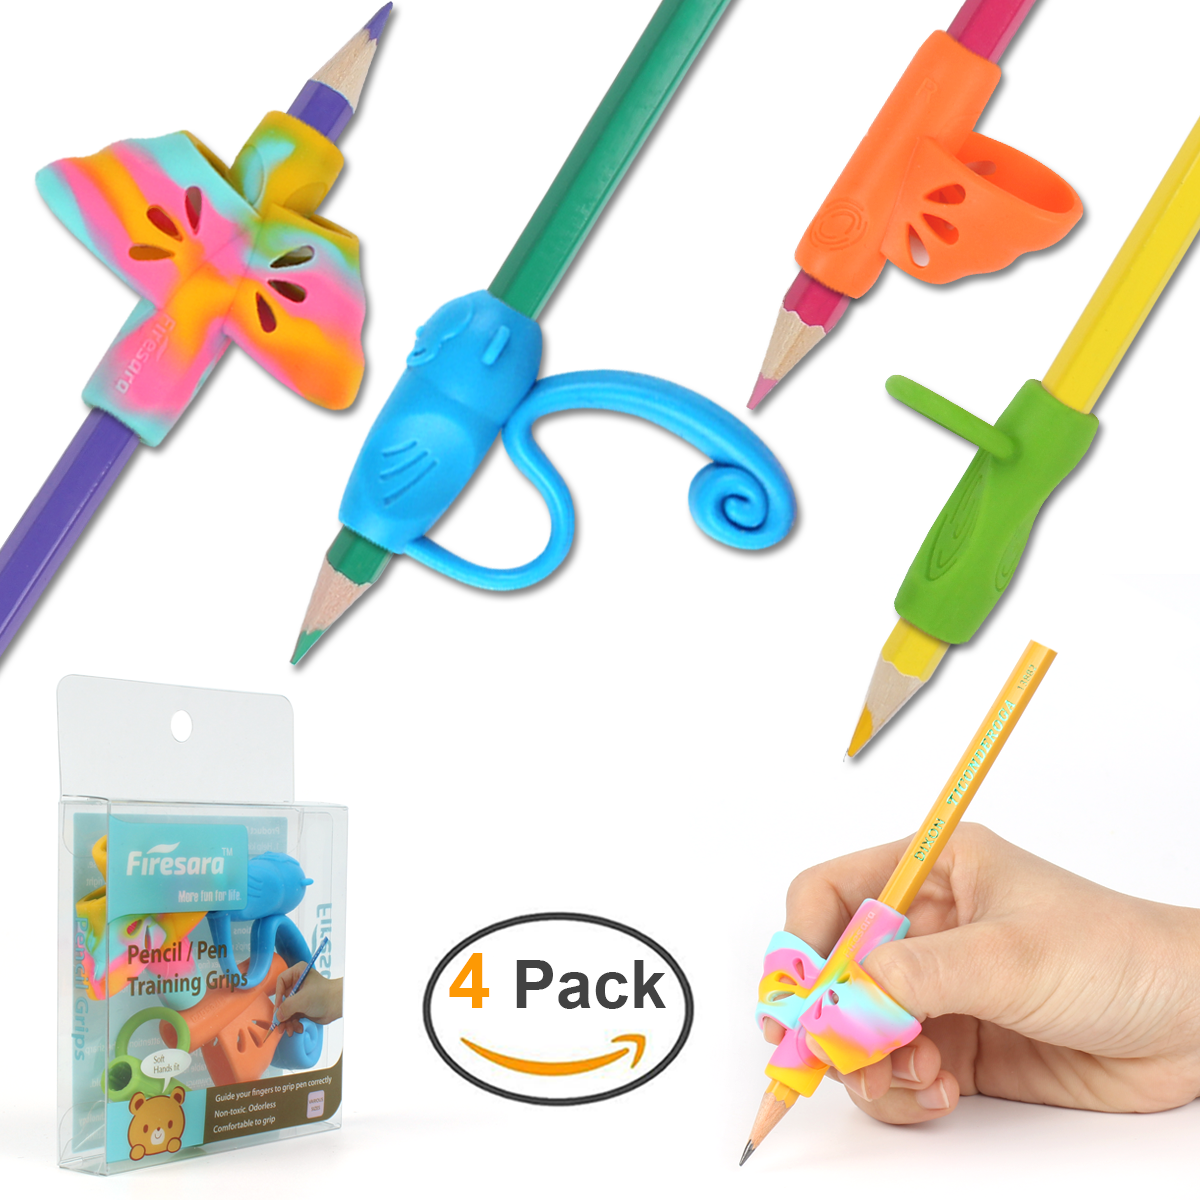 pencil grips for students with disabilities